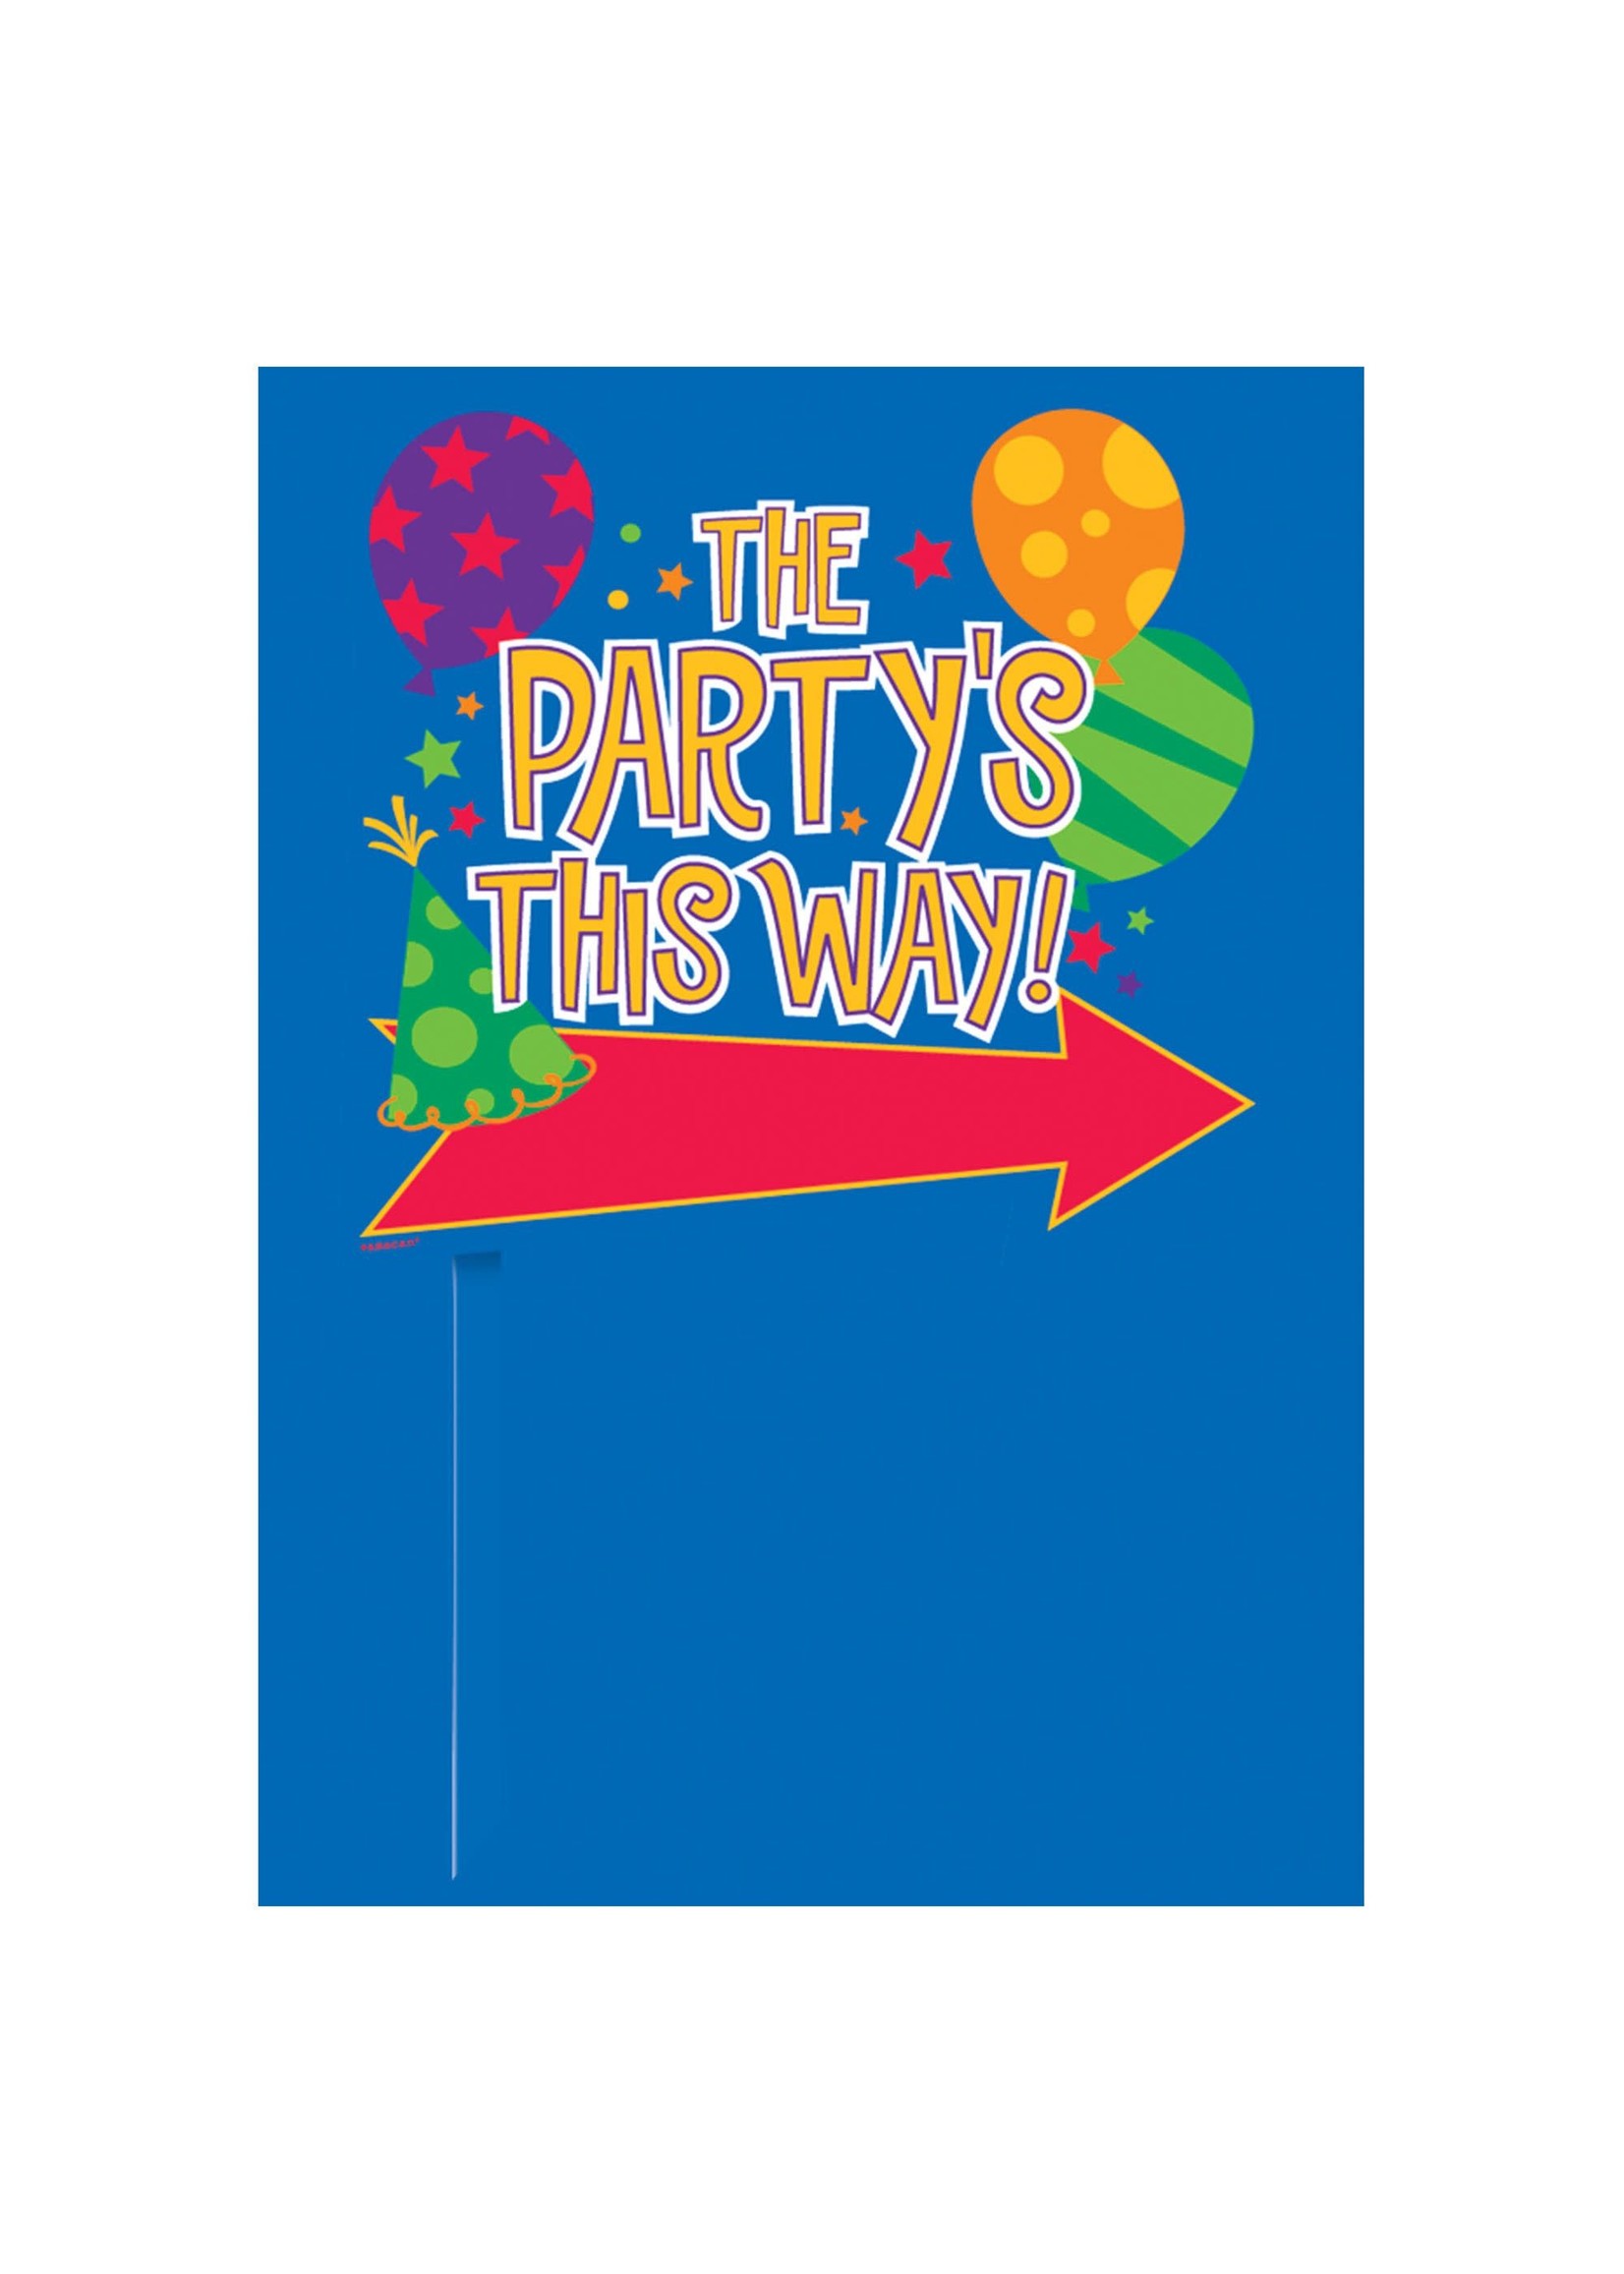 Amscan DIRECTIONAL YARD SIGN - THE PARTY'S THIS WAY!